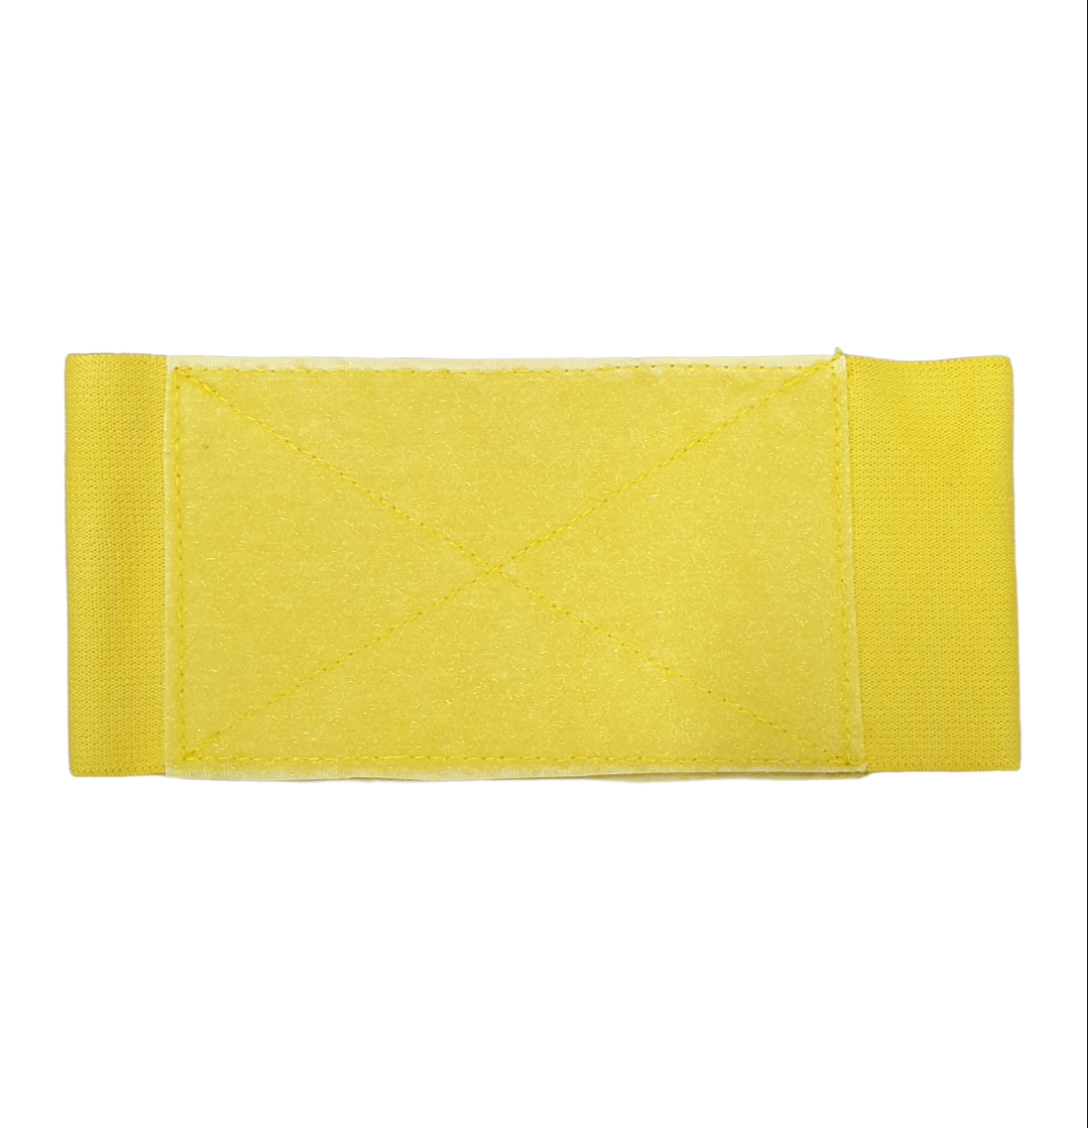 VolcAno Arm Band With Velcro, 3"Wide - Yellow